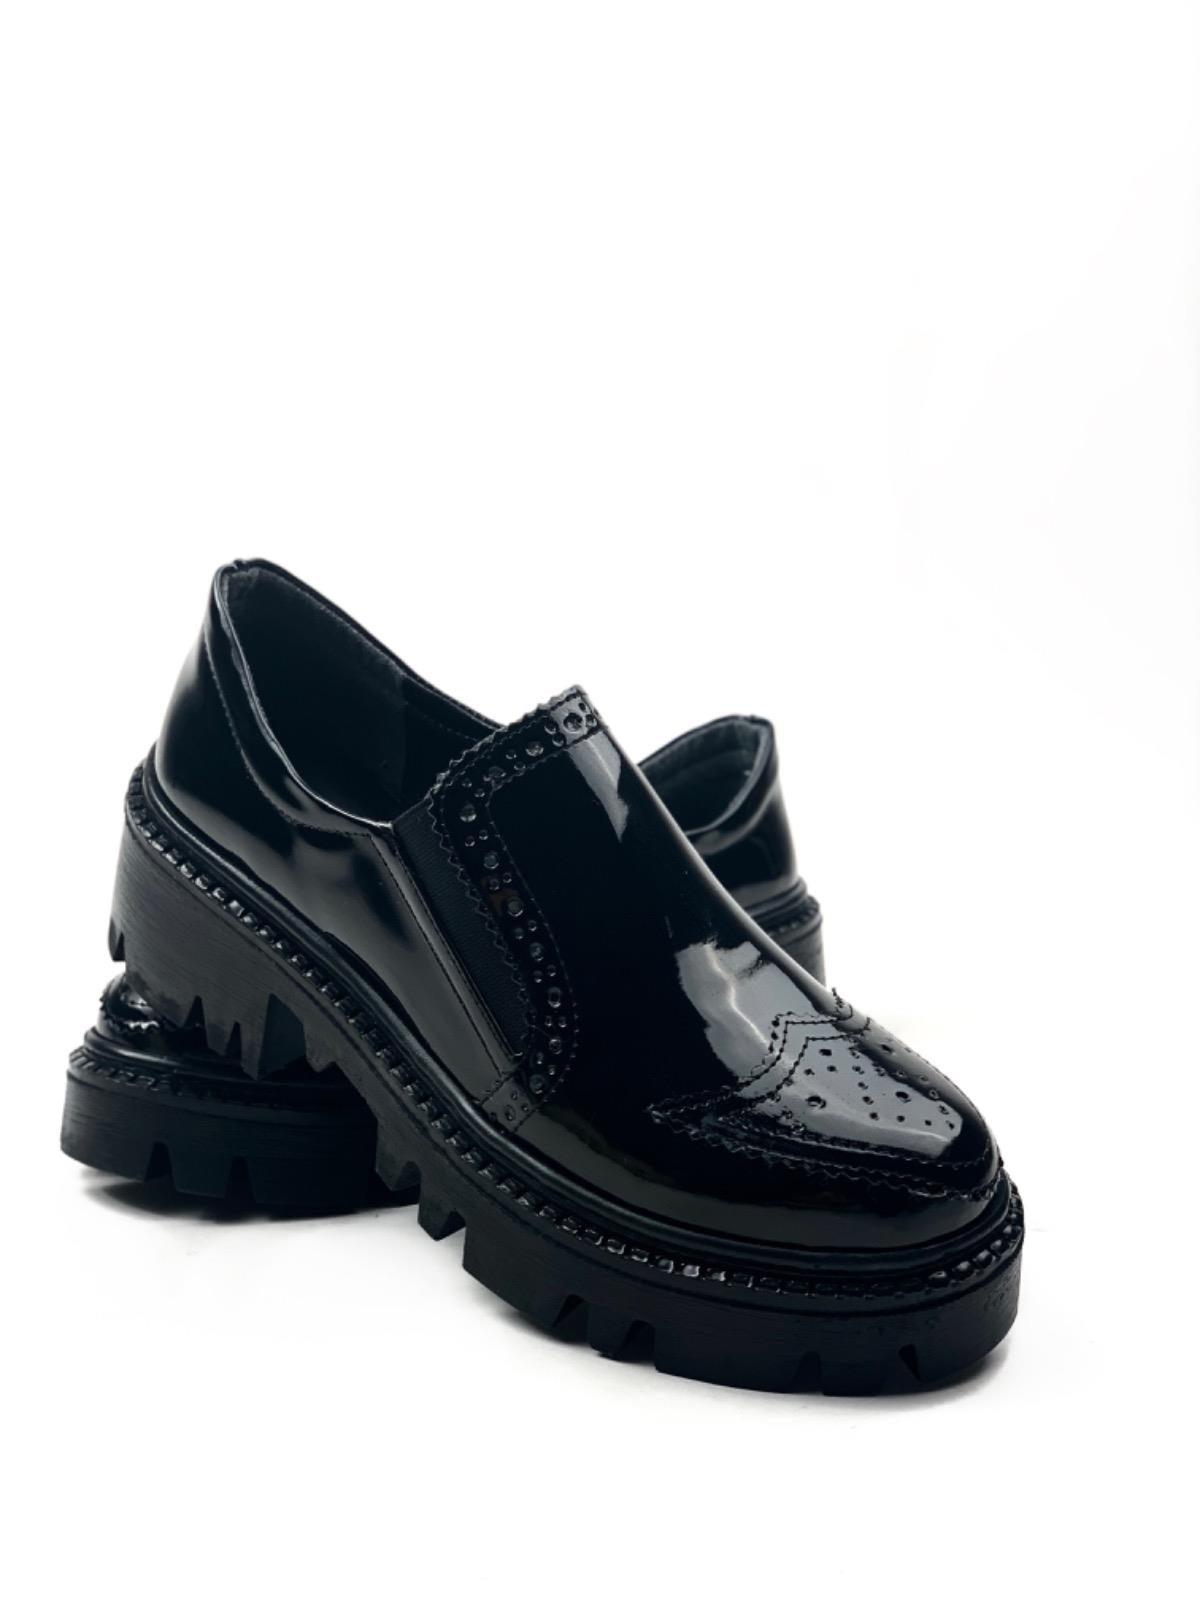 Women's Black Patent Leather Esda Daily Walking Leofer Moccasin Shoes - STREETMODE™